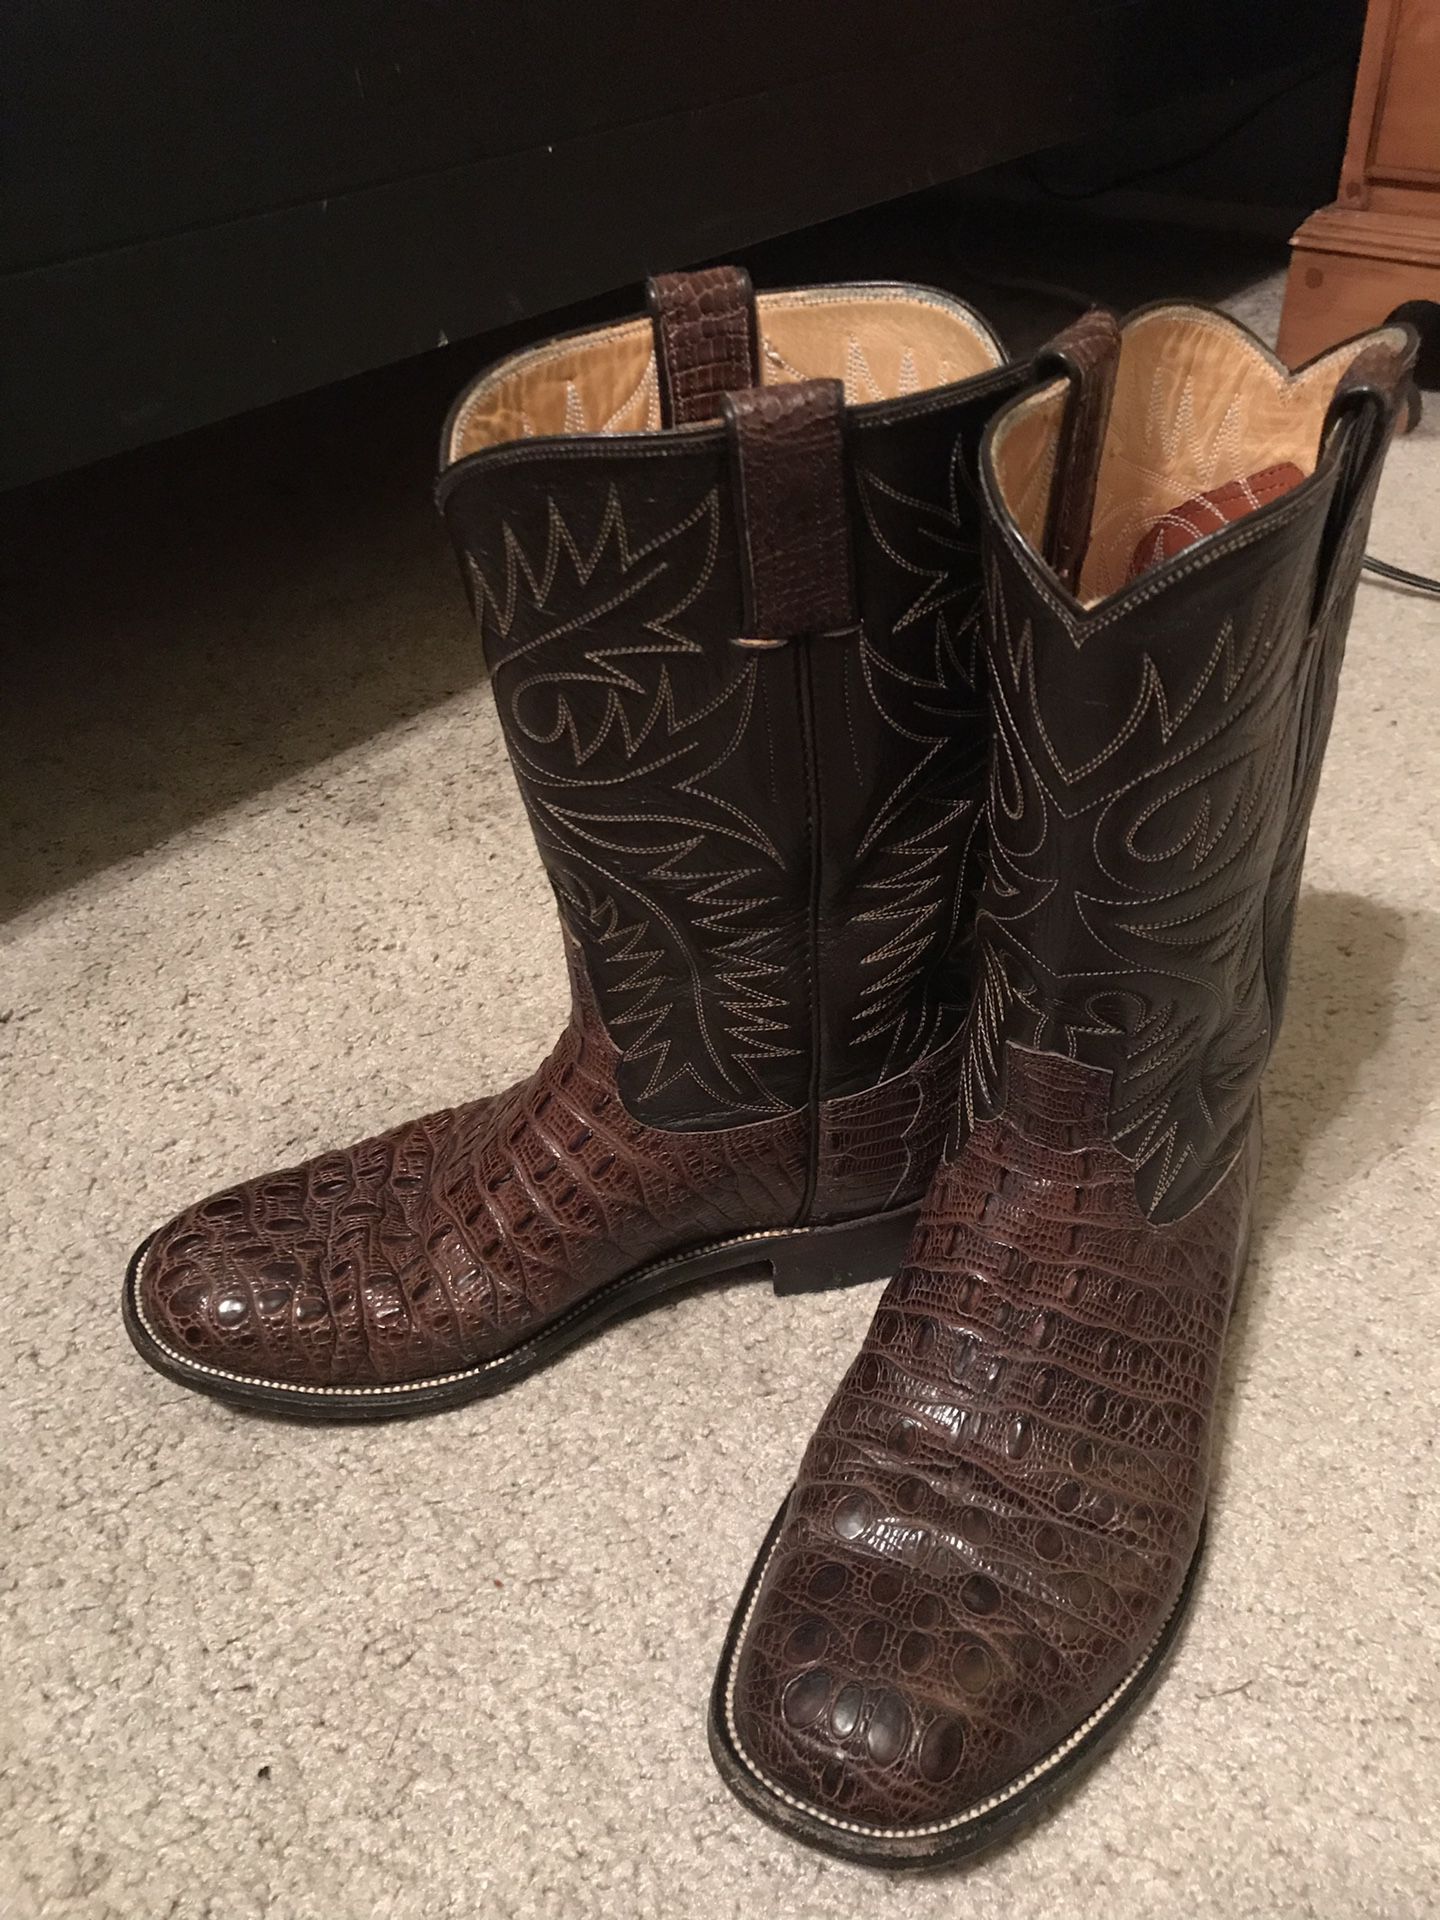 Cats Paw Heel- Cowboy boots